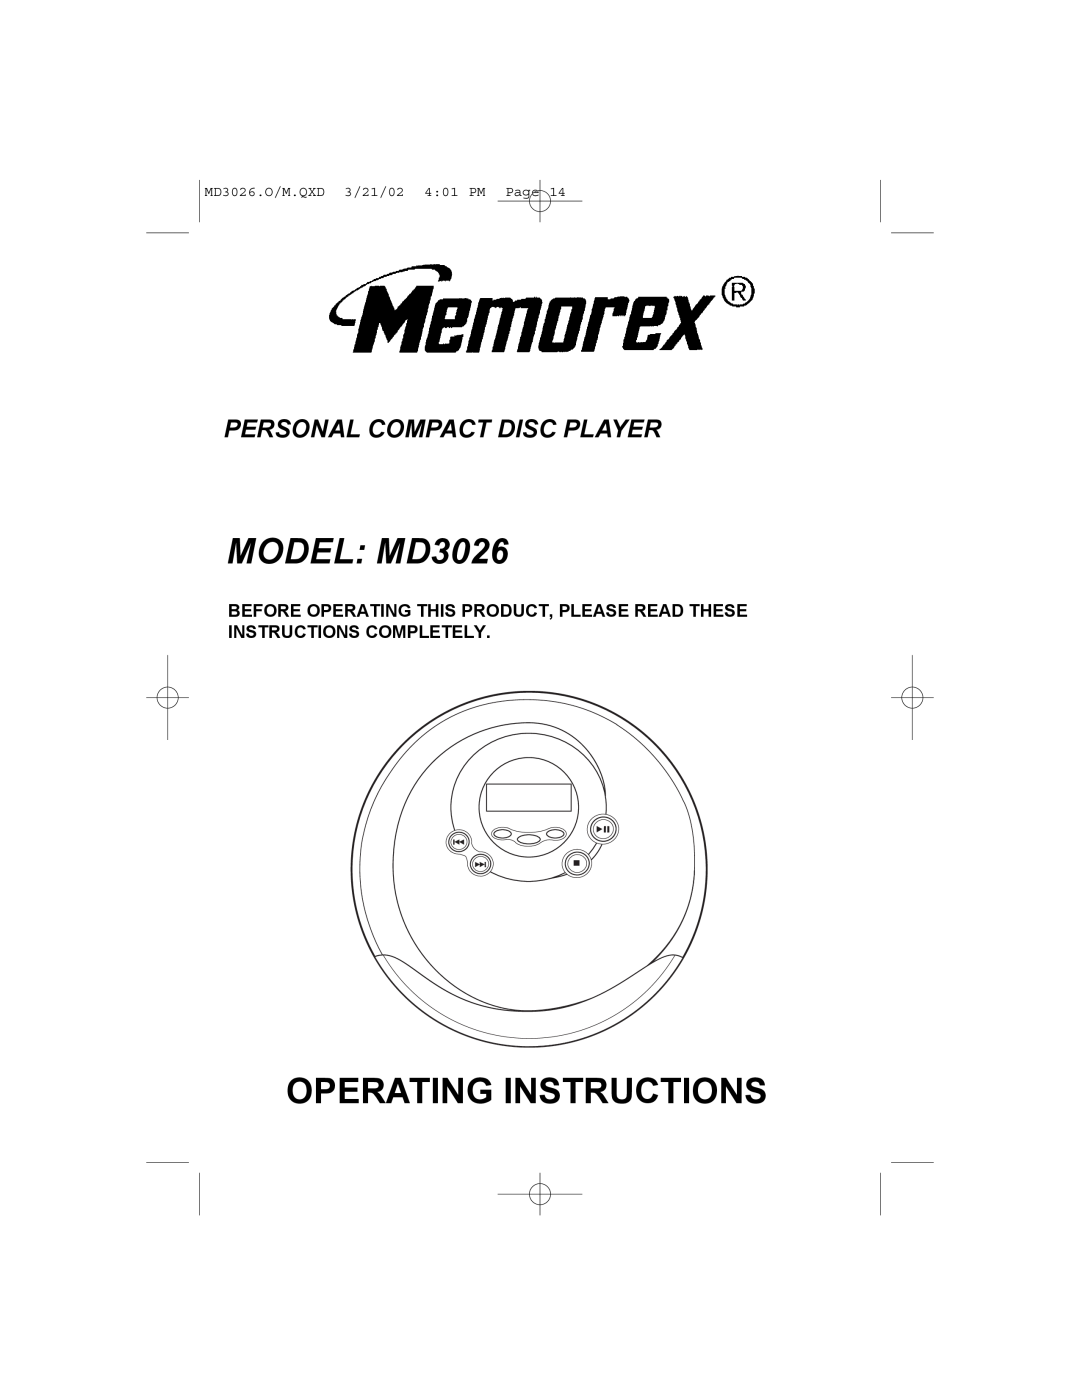 Memorex manual MODEL MD3026, Operating Instructions, Personal Compact Disc Player, MD3026.O/M.QXD 3/21/02 4 01 PM Page 